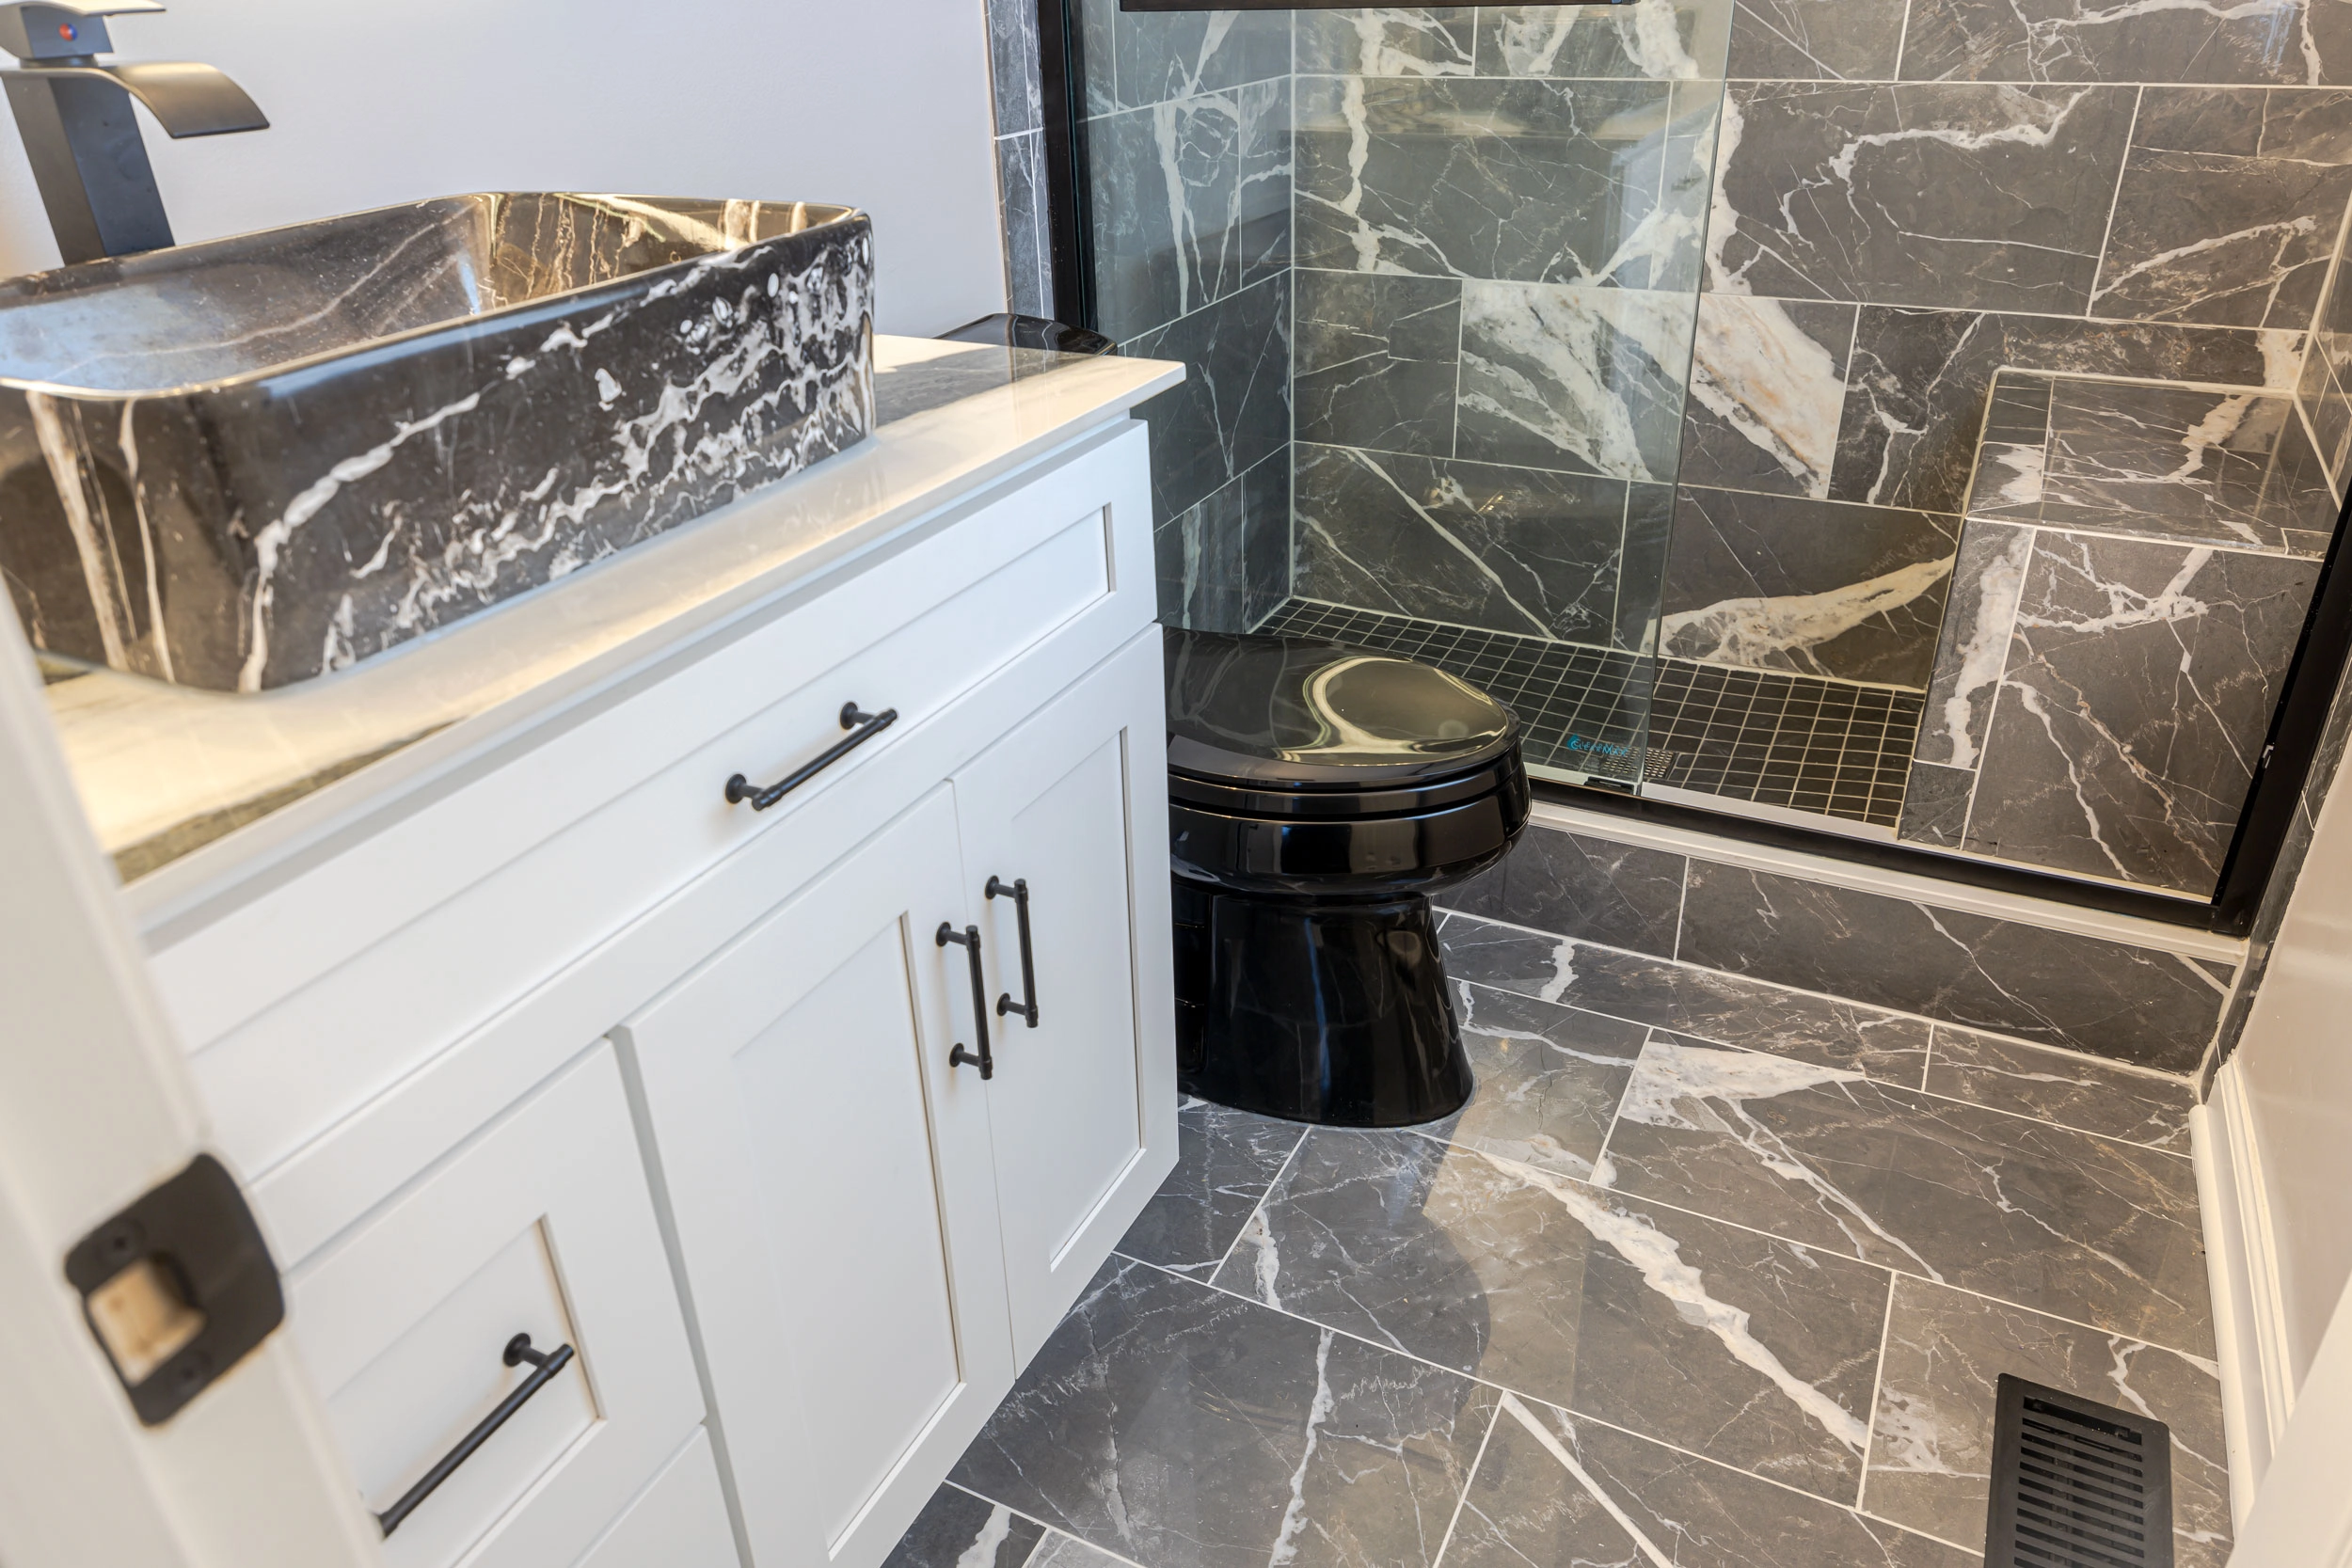 A luxurious bathroom transformation in Bowie, Maryland, by Zion Home Remodeling®. Features black marble-look shower tiles, mosaic floor, sleek white vanity with black vein countertop, vessel sink, black toilet, and oil-rubbed hardware.